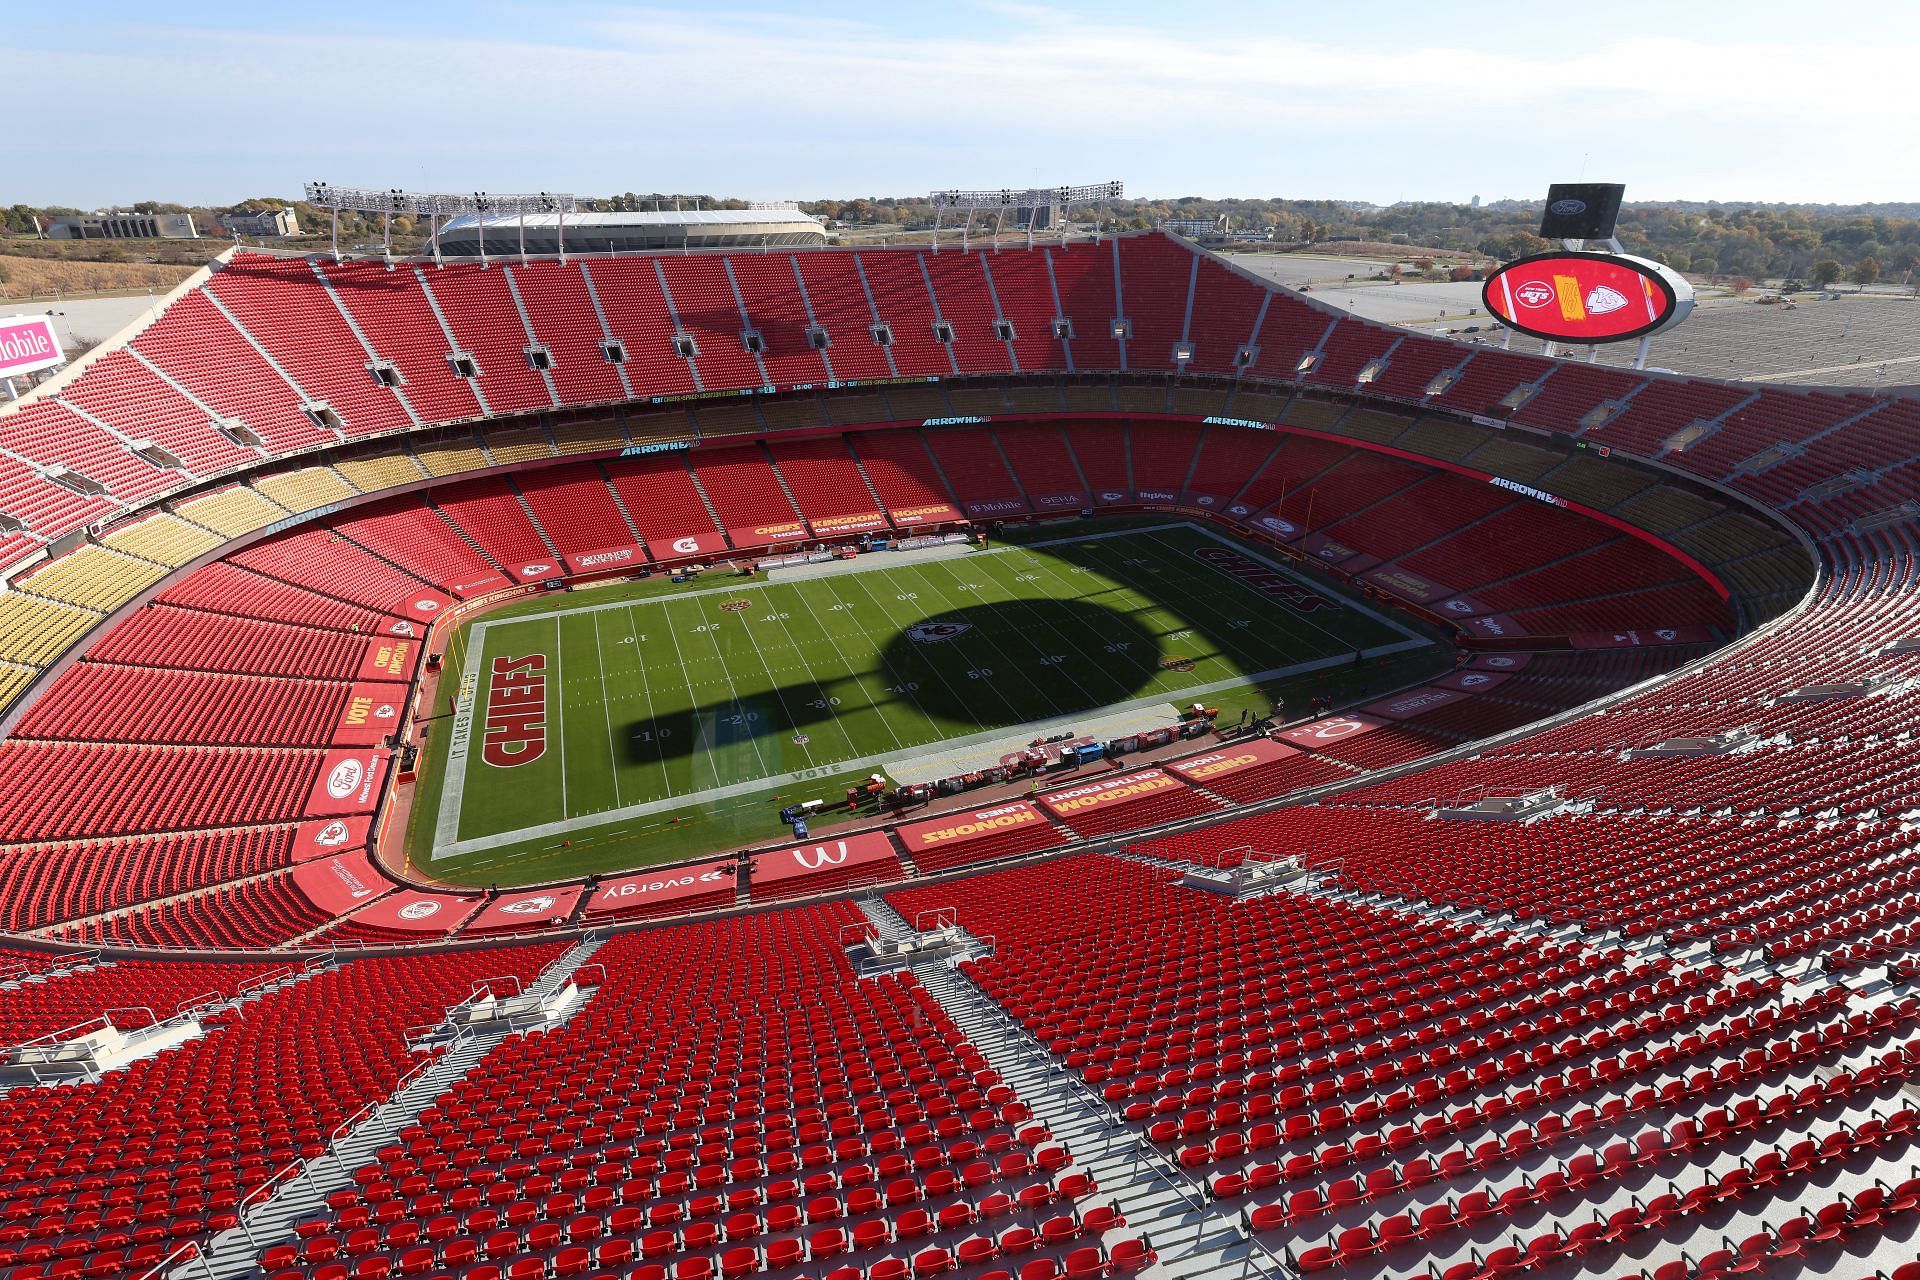 Arrowhead Stadium is due for big renovations ahead of the 2026 FIFA World Cup